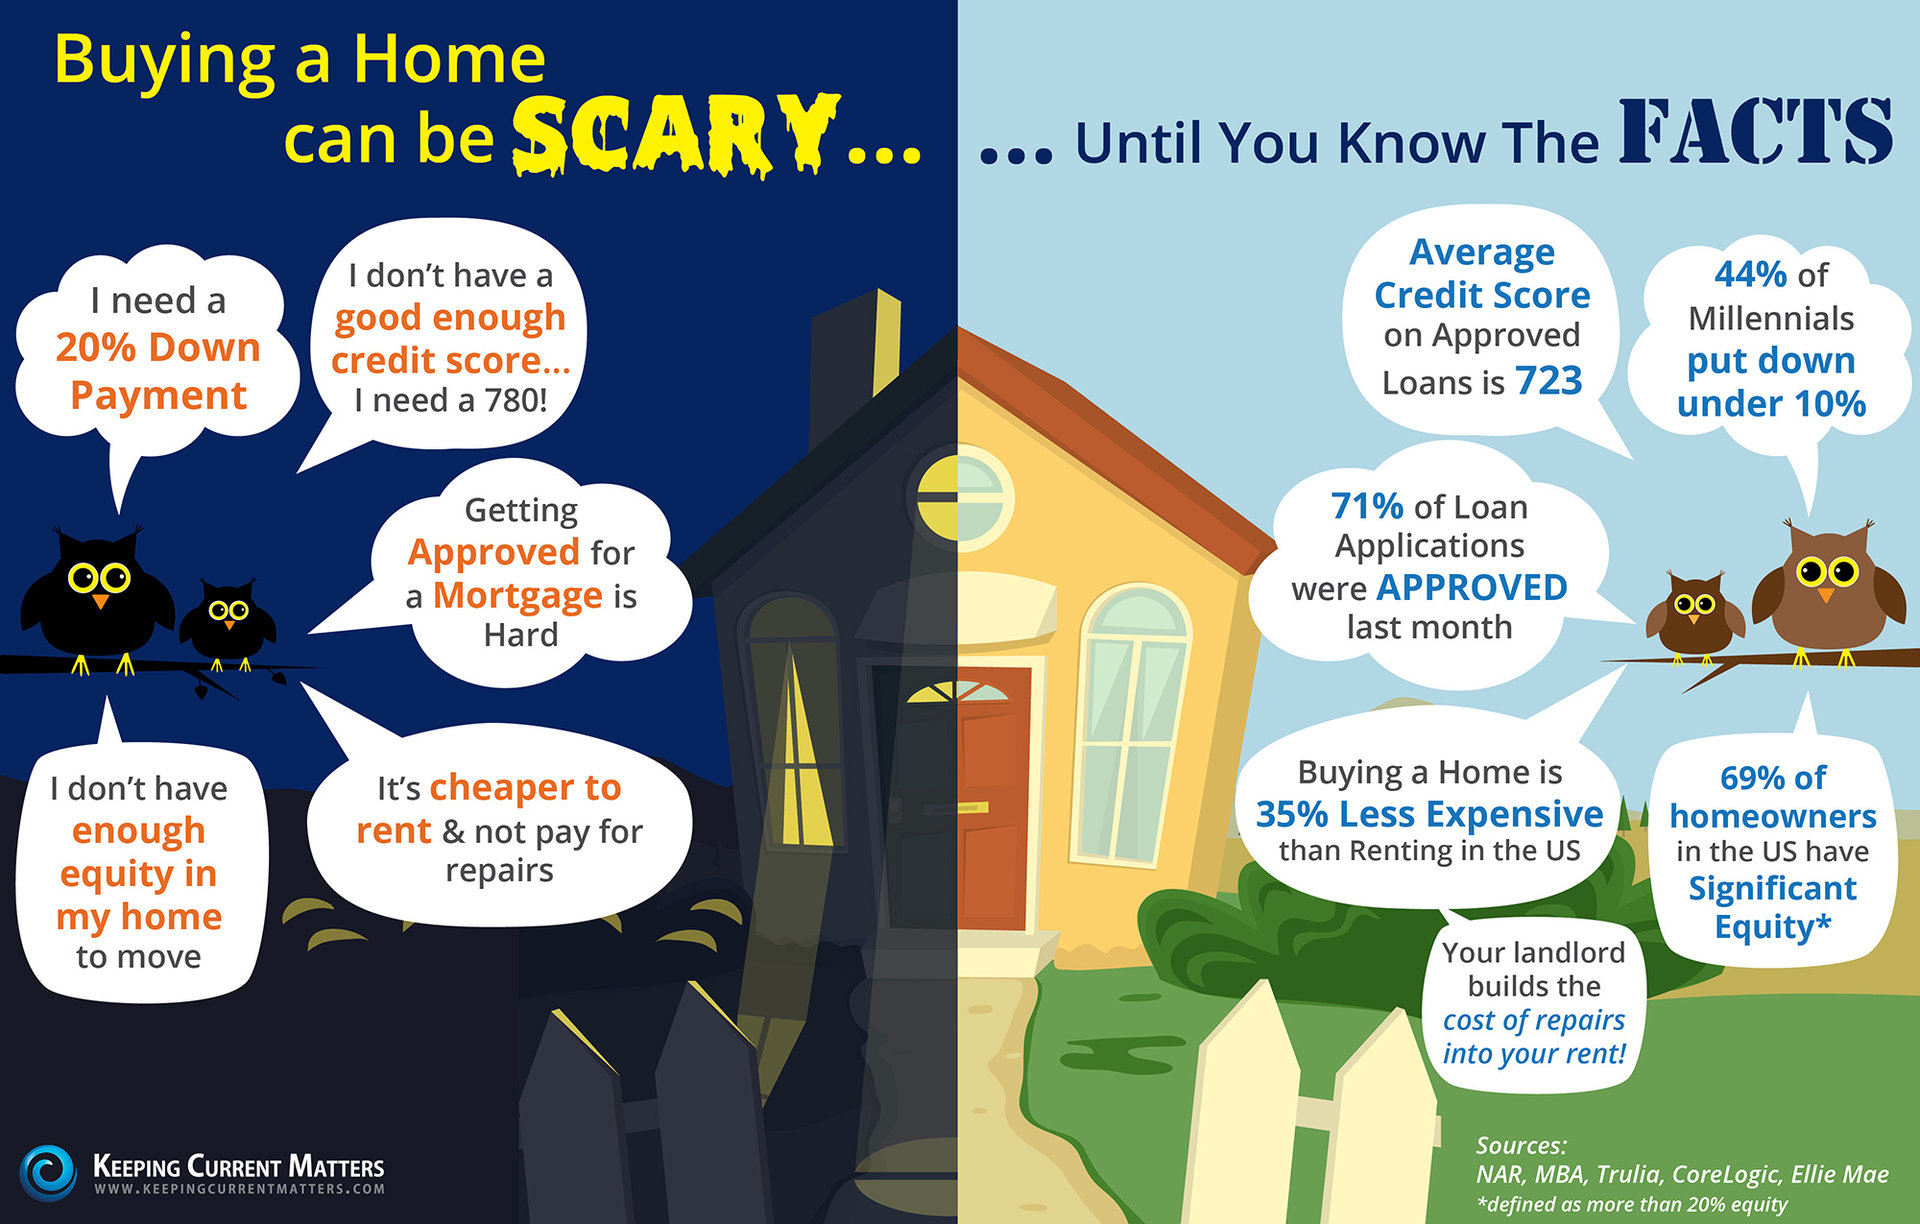 Buying A Home Can Be Scary... Until You Know the FACTS! [INFOGRAPHIC] | Keeping Current Matters